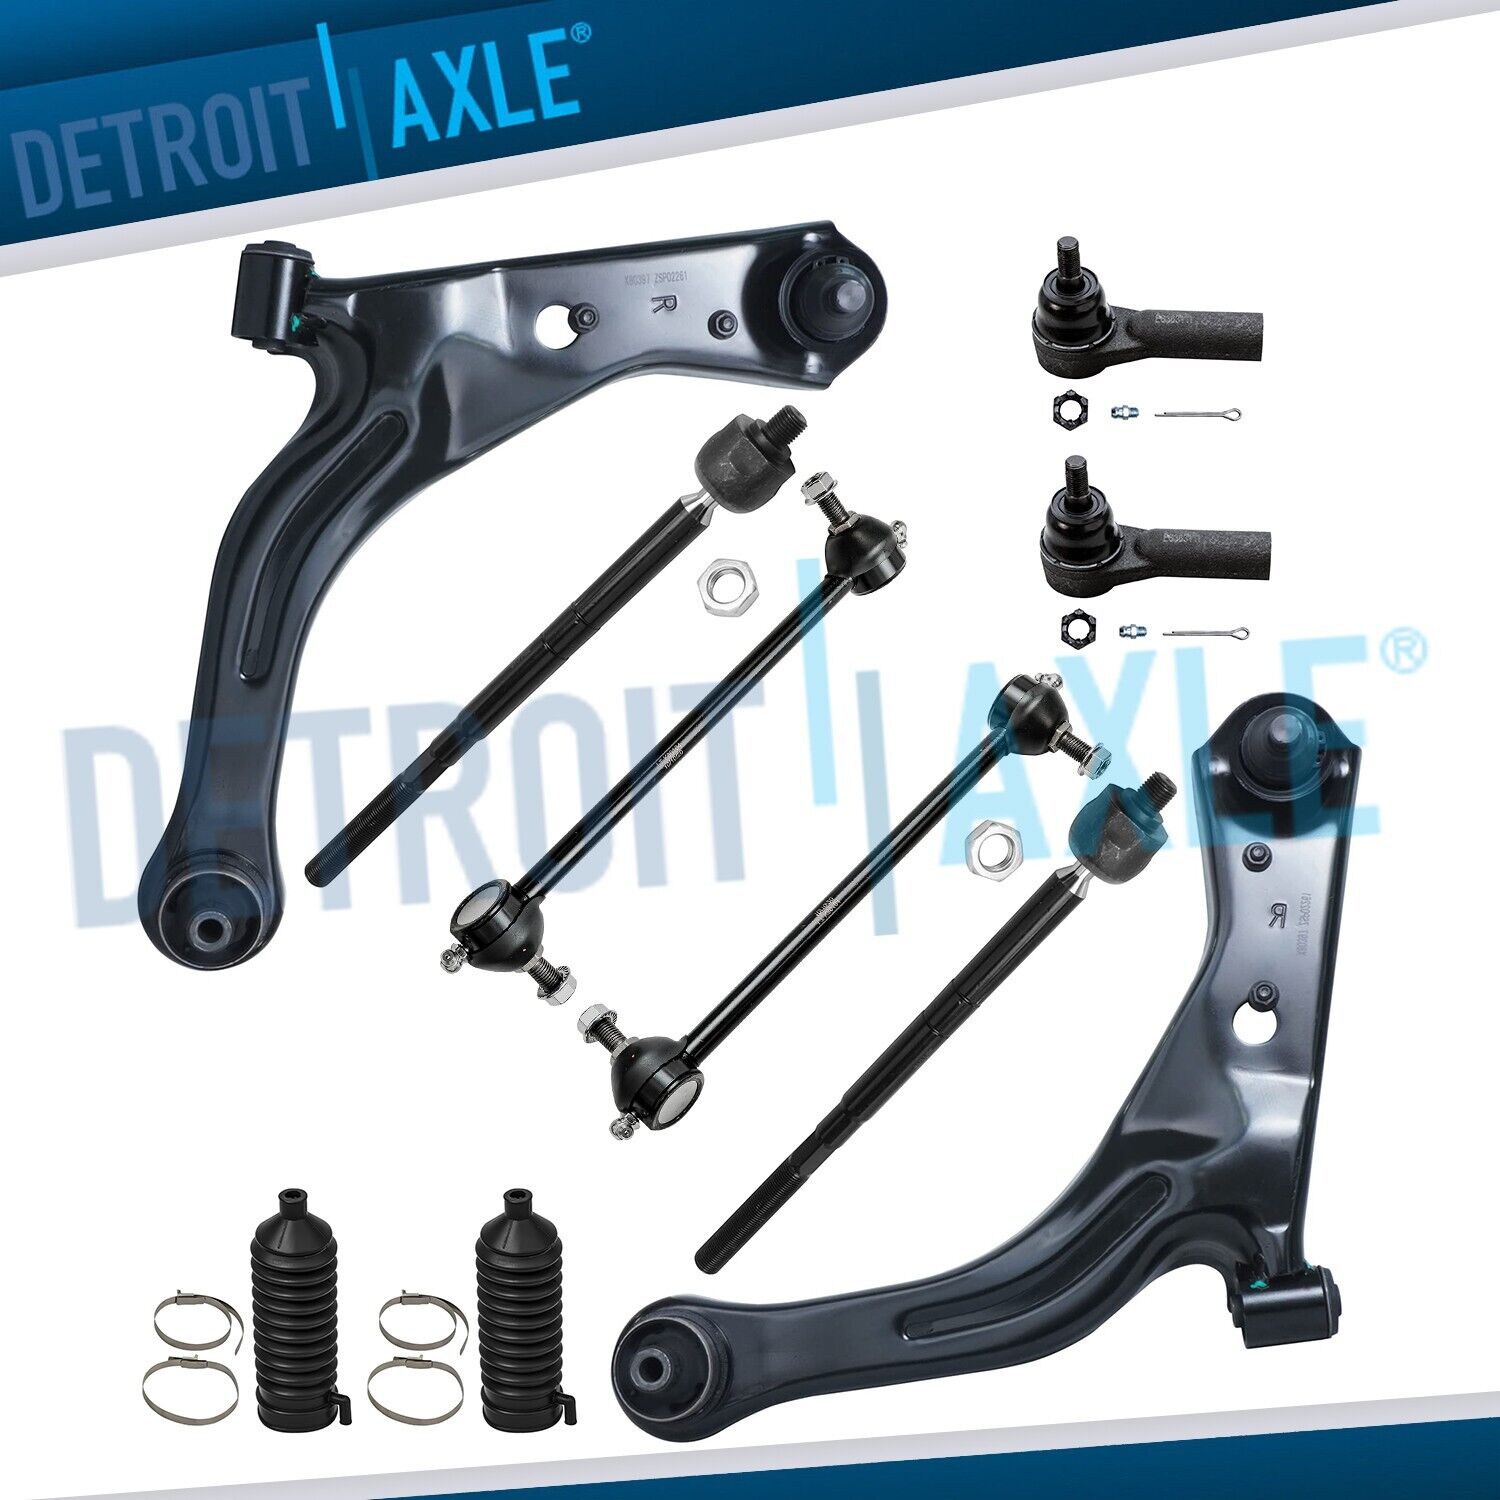 10pc Front Lower Control Arms + Tie Rod + Sway Bar for Ford Escape Mazda Tribute